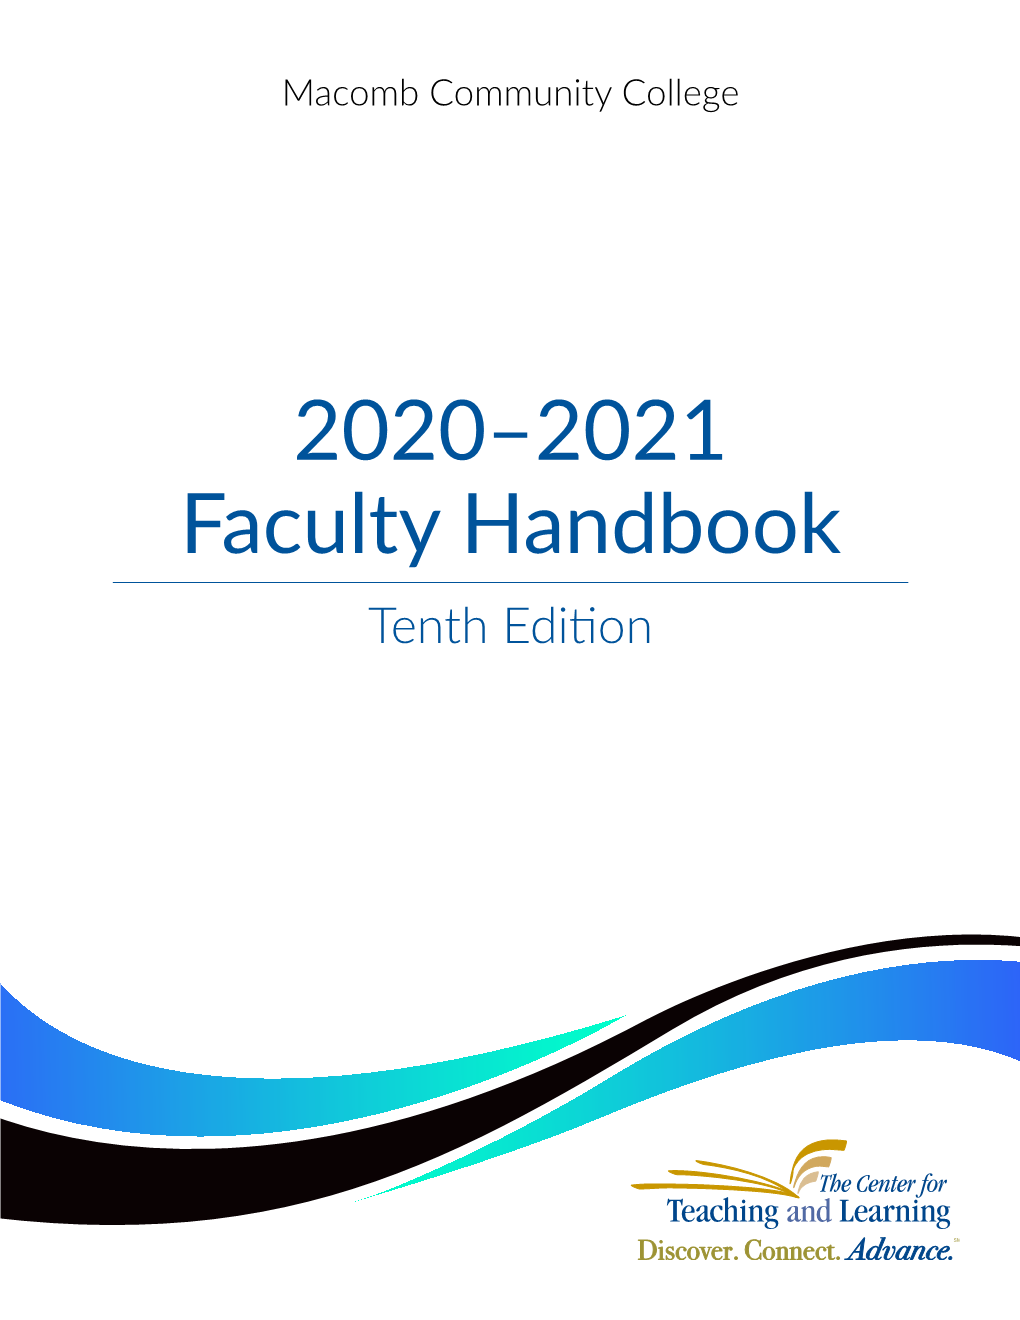 2020–2021 Faculty Handbook Tenth Edition Dear Colleagues: Welcome to Macomb Community College